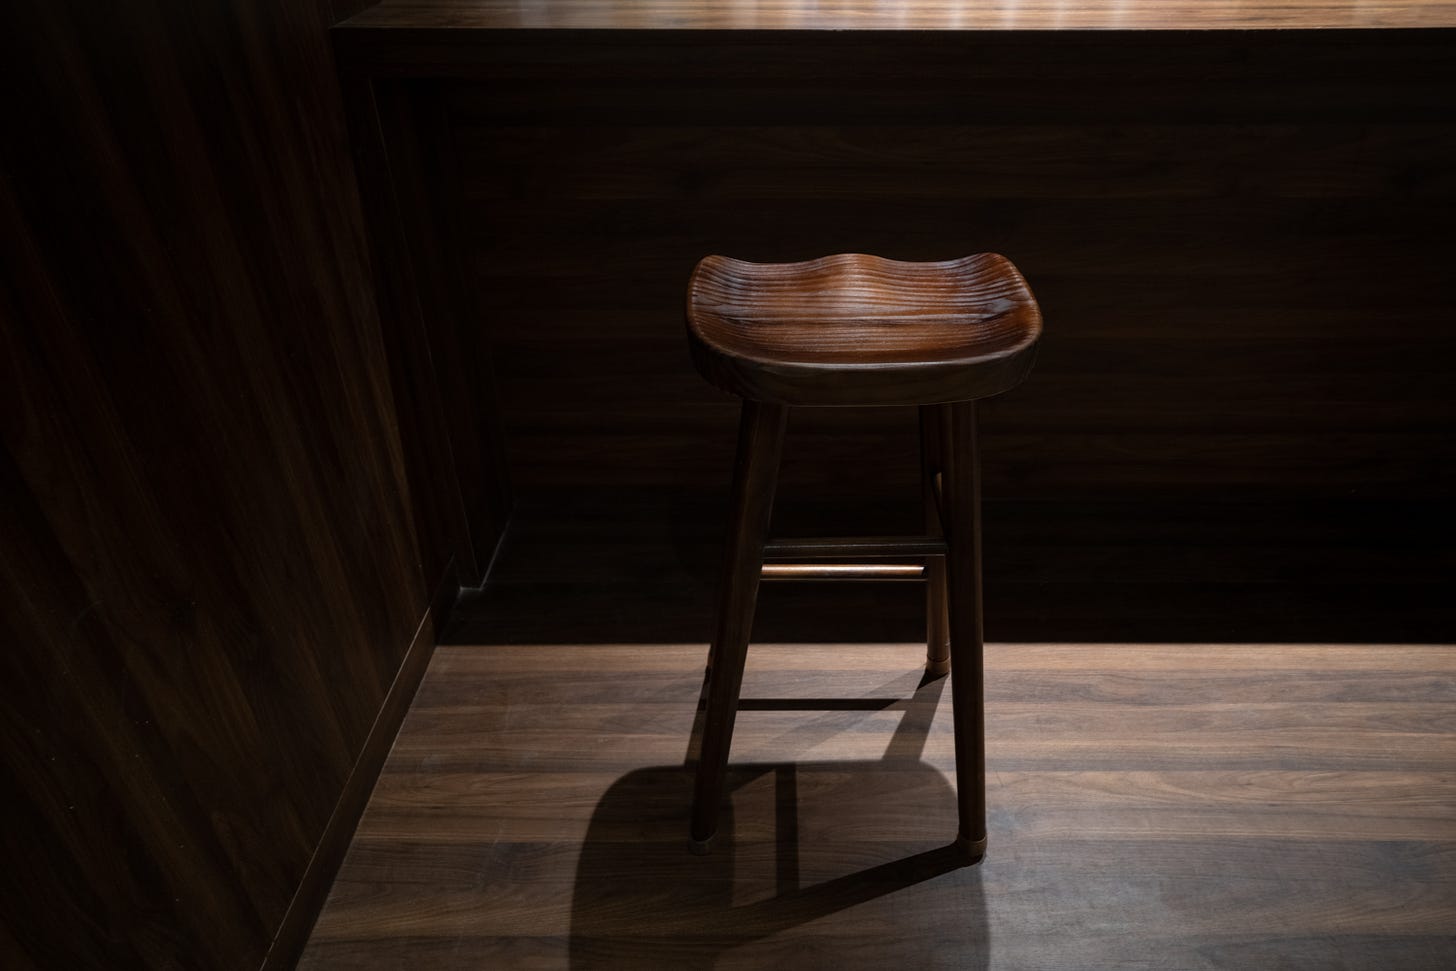 A lone wooden bar stool next to  a wooden bar on a hard wood floor